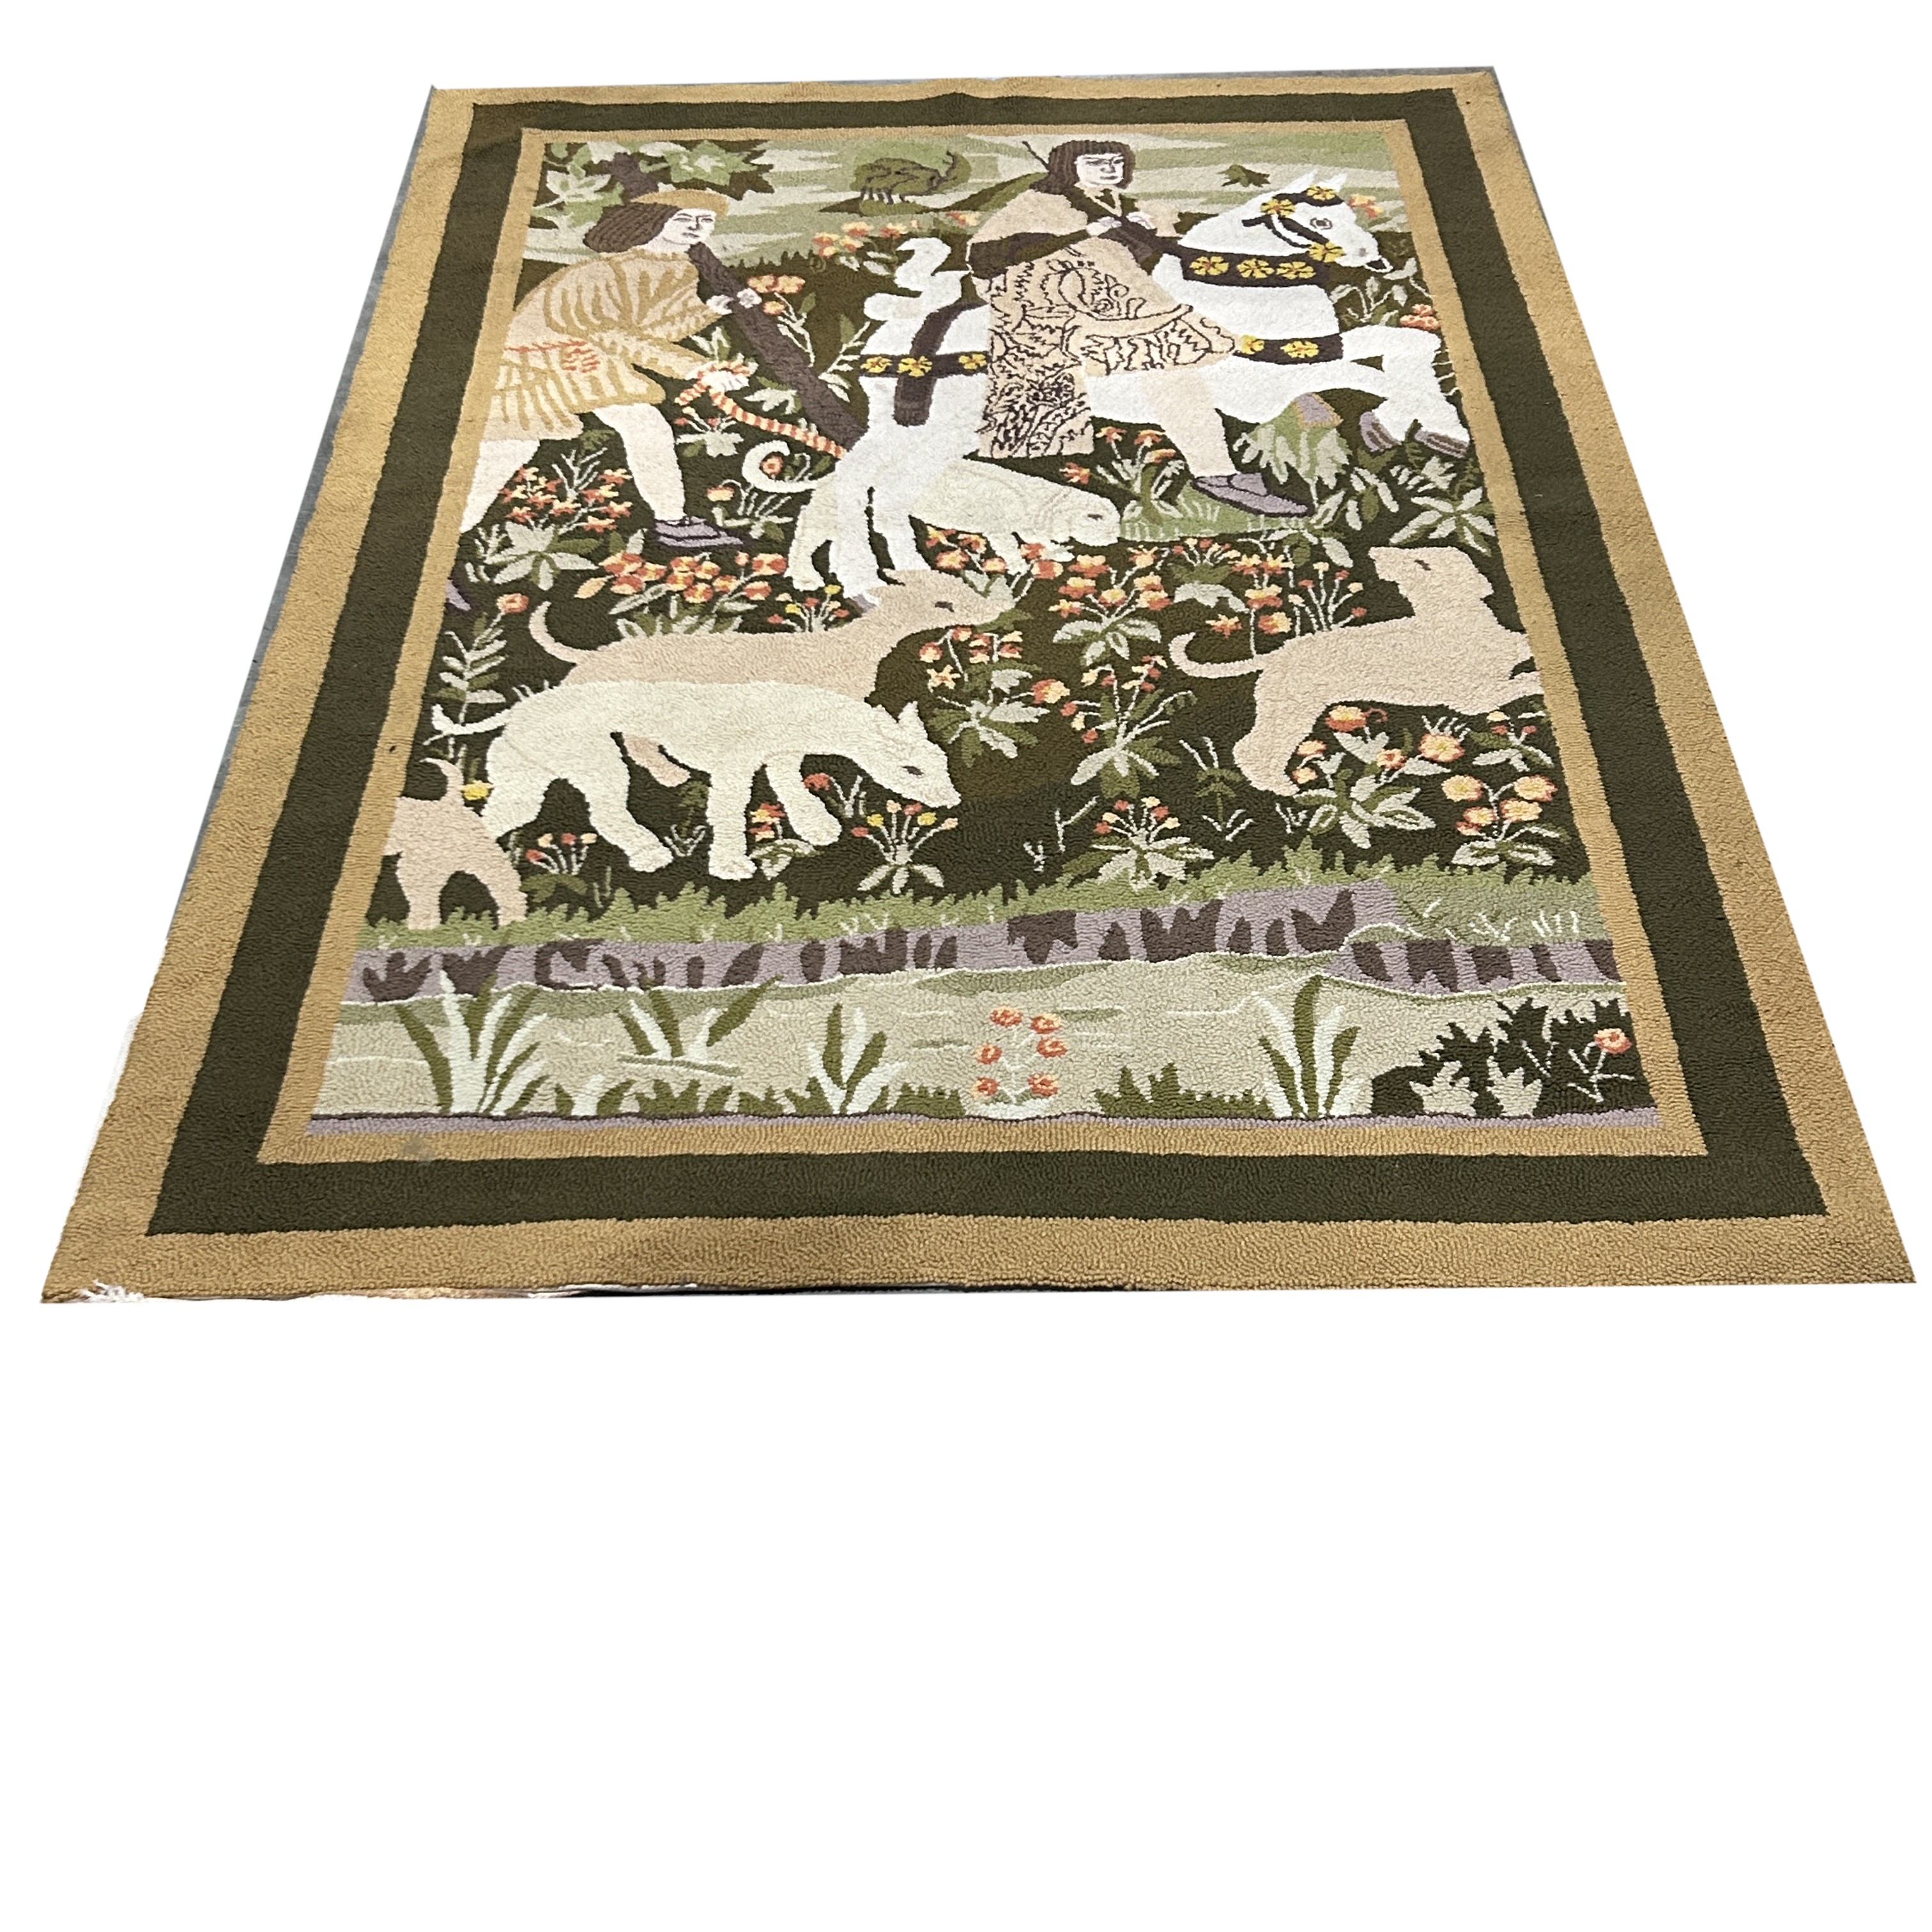 A MEDIEVAL STYLE SCENIC WALL HANGING